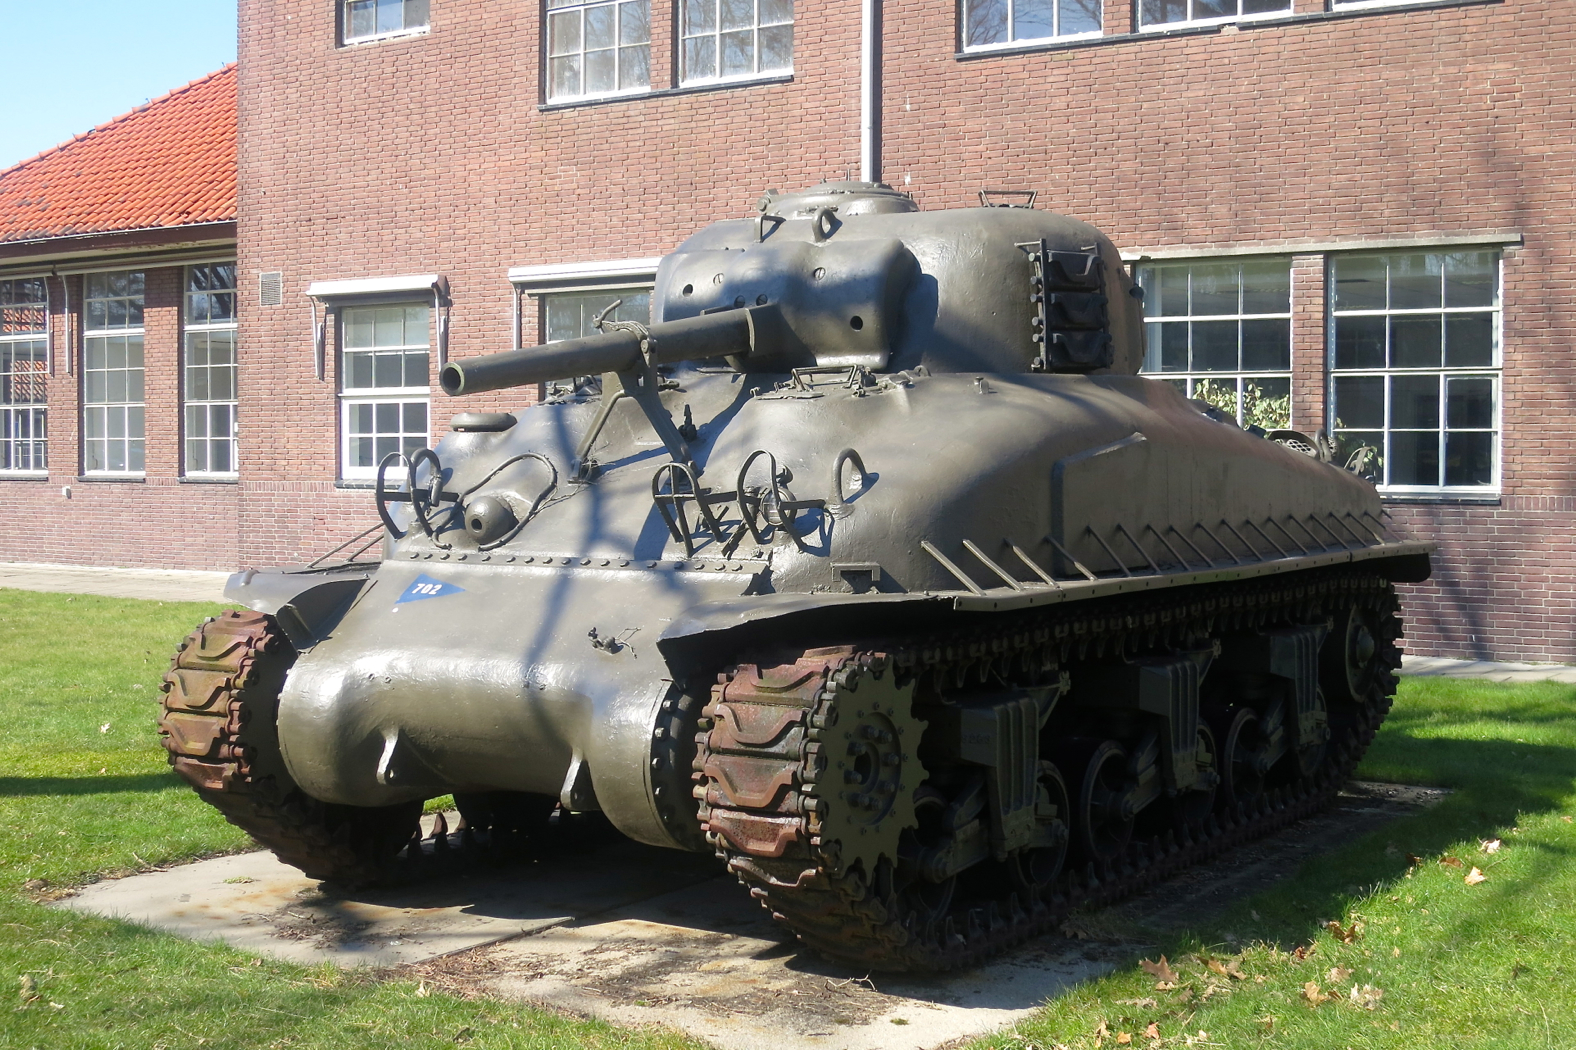 a camouflaged army tank is shown in a courtyard